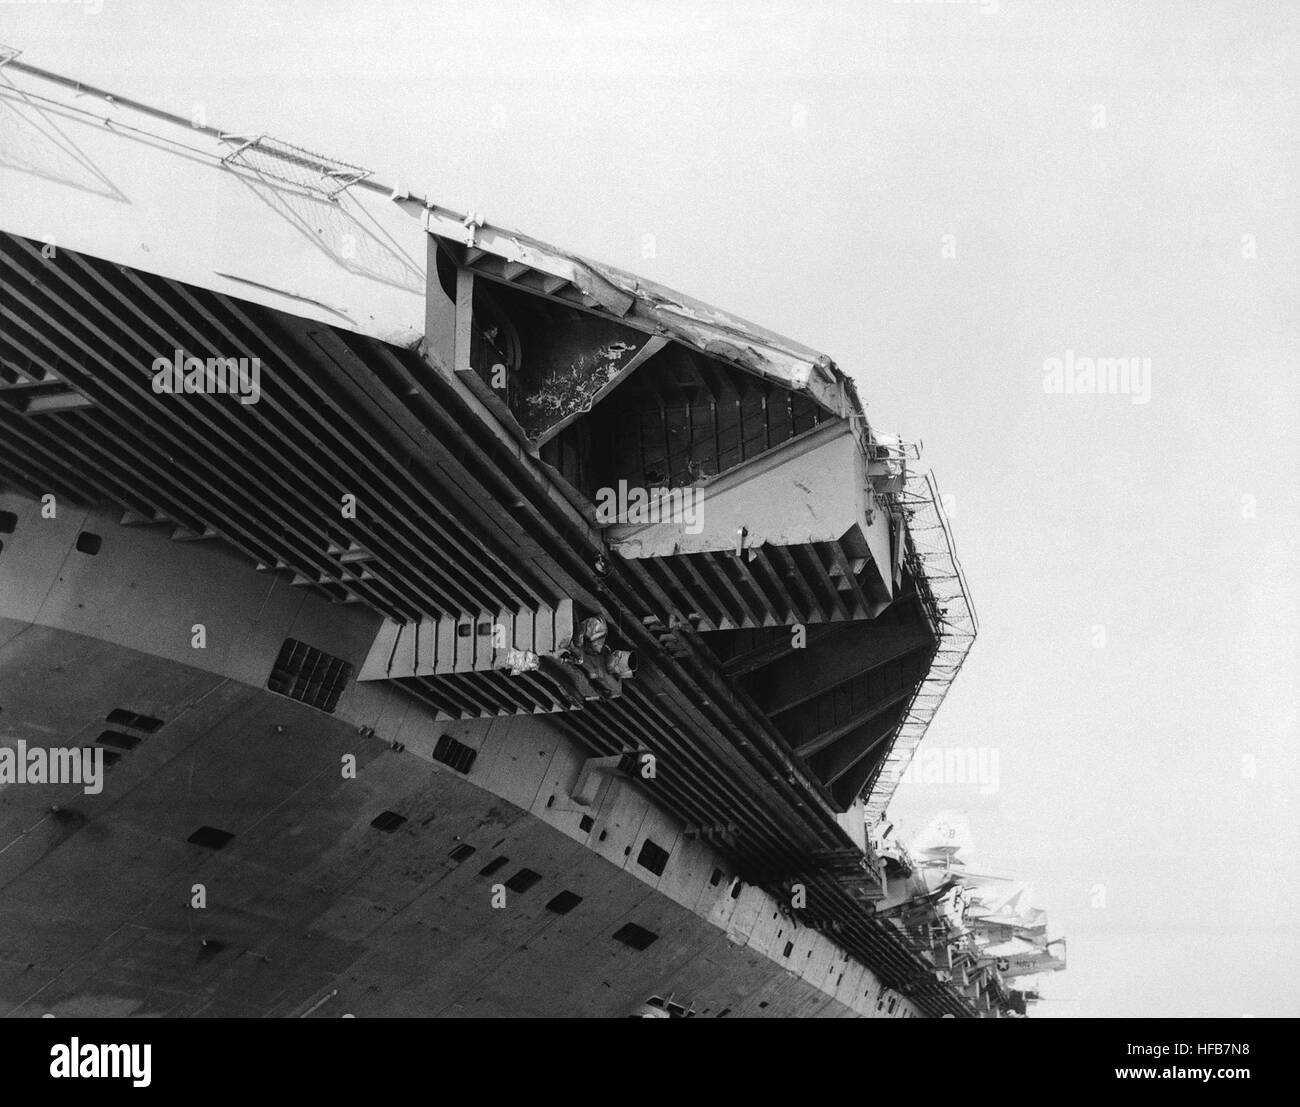 A view of damage sustained by the aircraft carrier USS JOHN F. KENNEDY (CV 67) when it collided with the guided missile cruiser USS BELKNAP (CG 26) during night operations on November 22, 1975. DN-SN-87-07333 USS John F. Kennedy damaged front end of angled deck Stock Photo